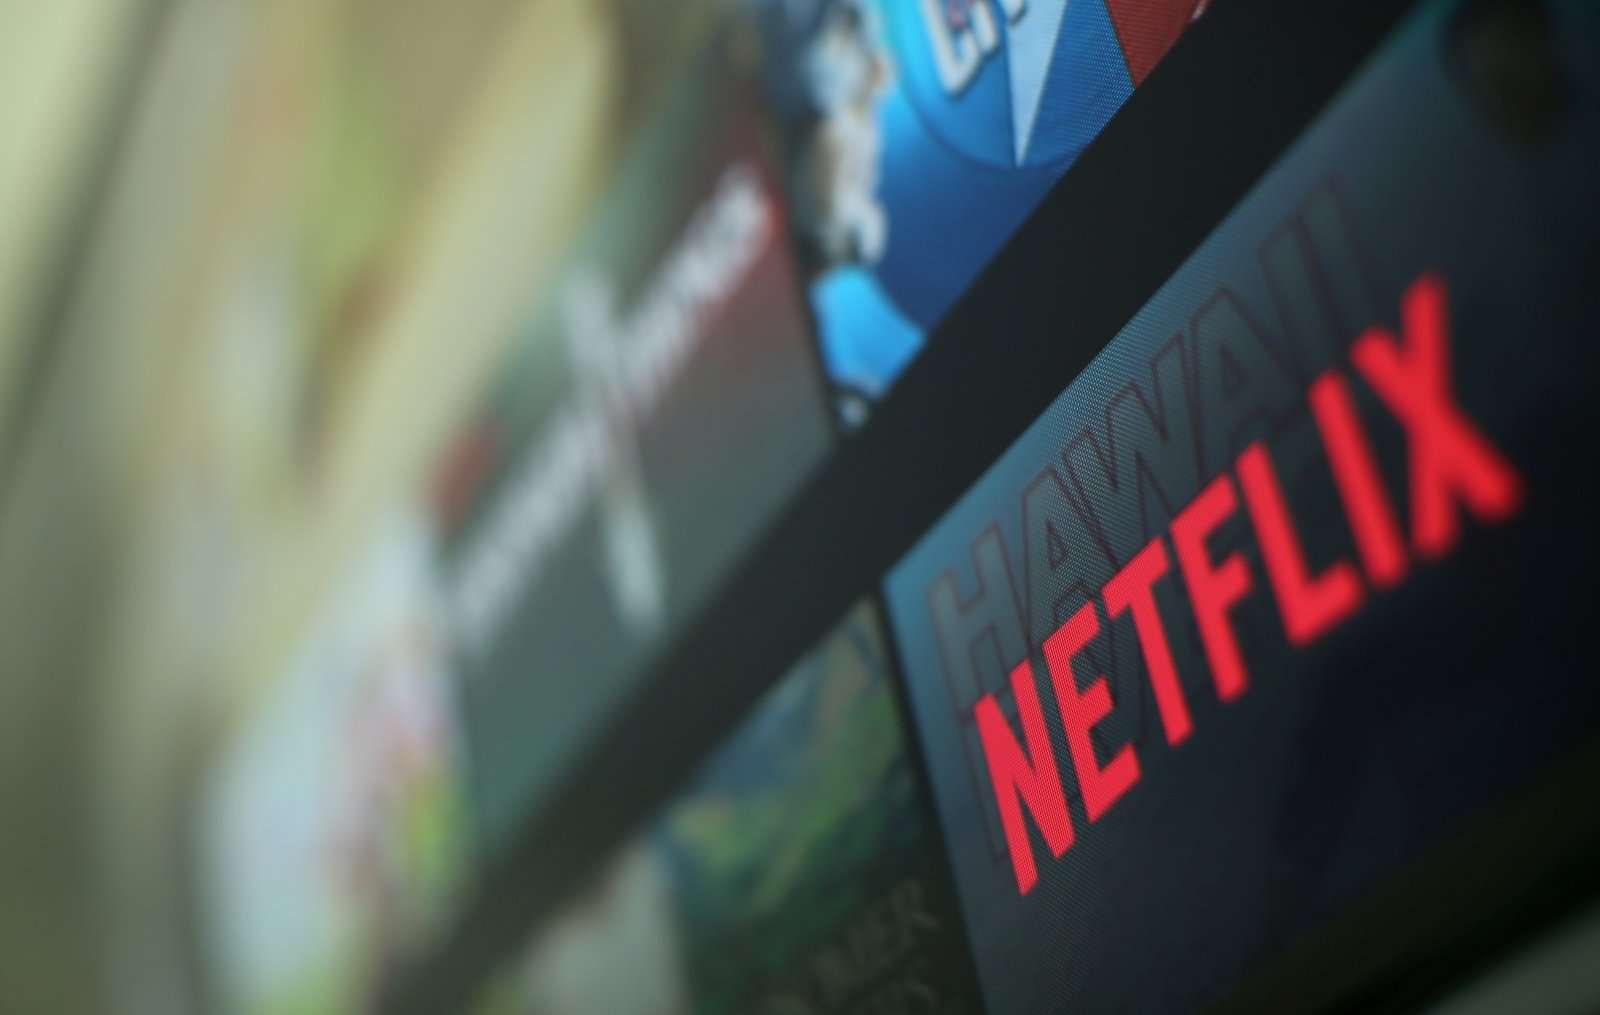 image for Netflix once loved talking about net neutrality - so why has it suddenly gone quiet?